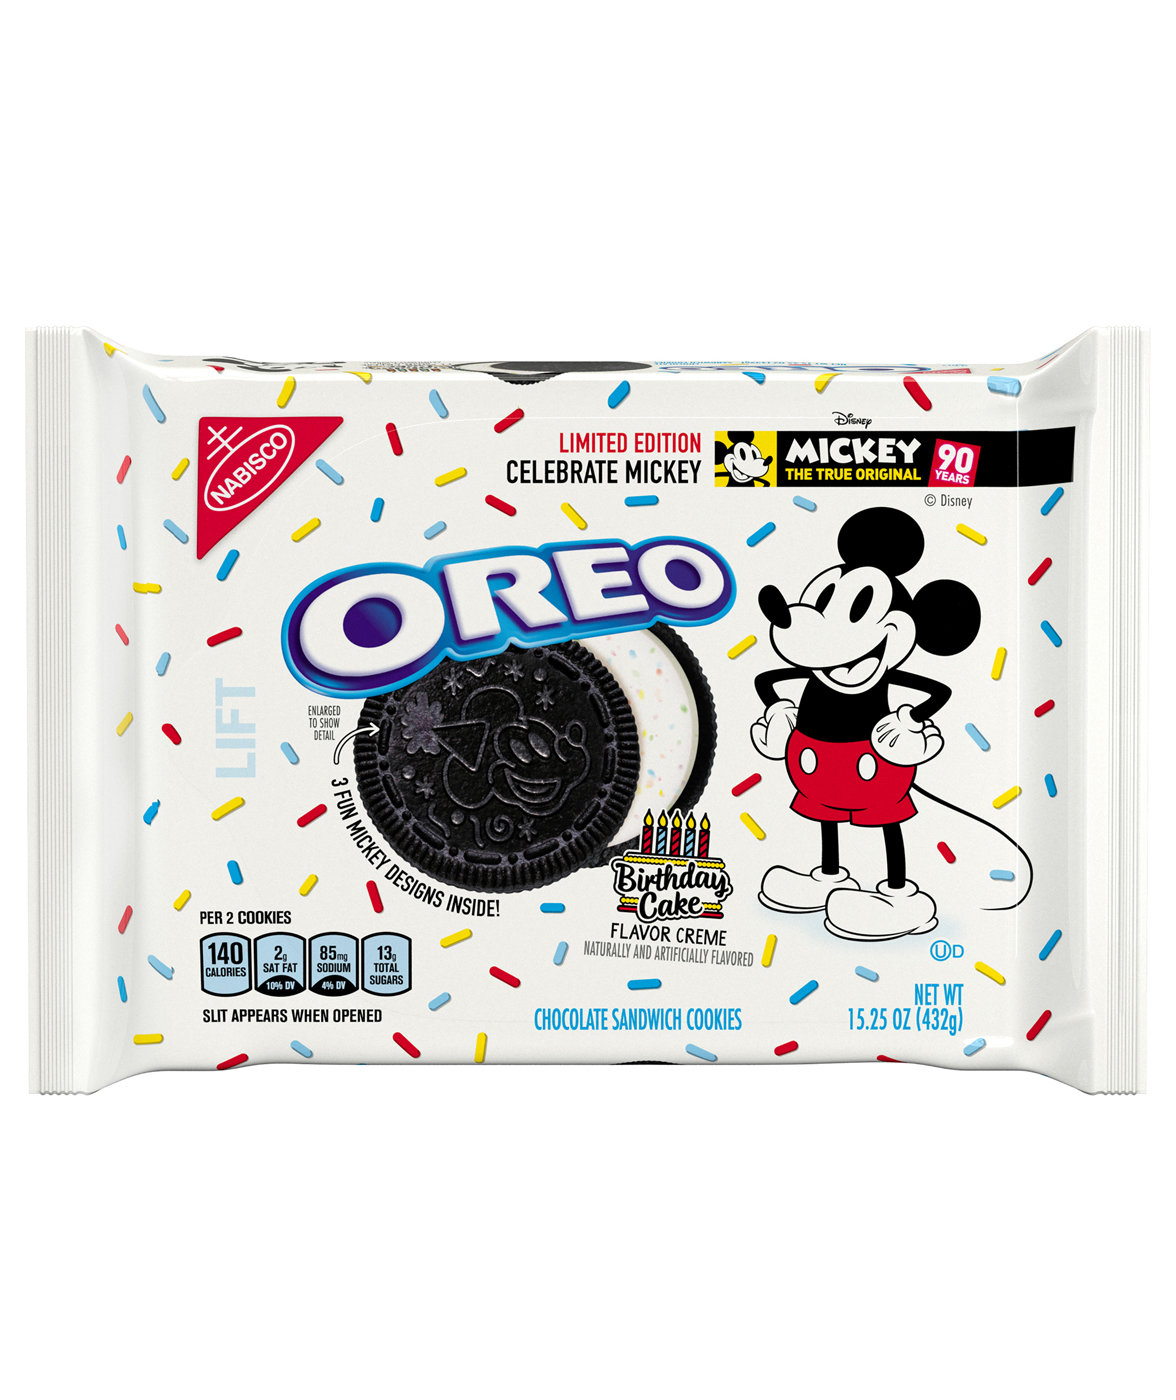 The Latest Oreo Flavor Celebrates Mickey Mouse&mdash;and It&rsquo;s Unbelievably Tasty